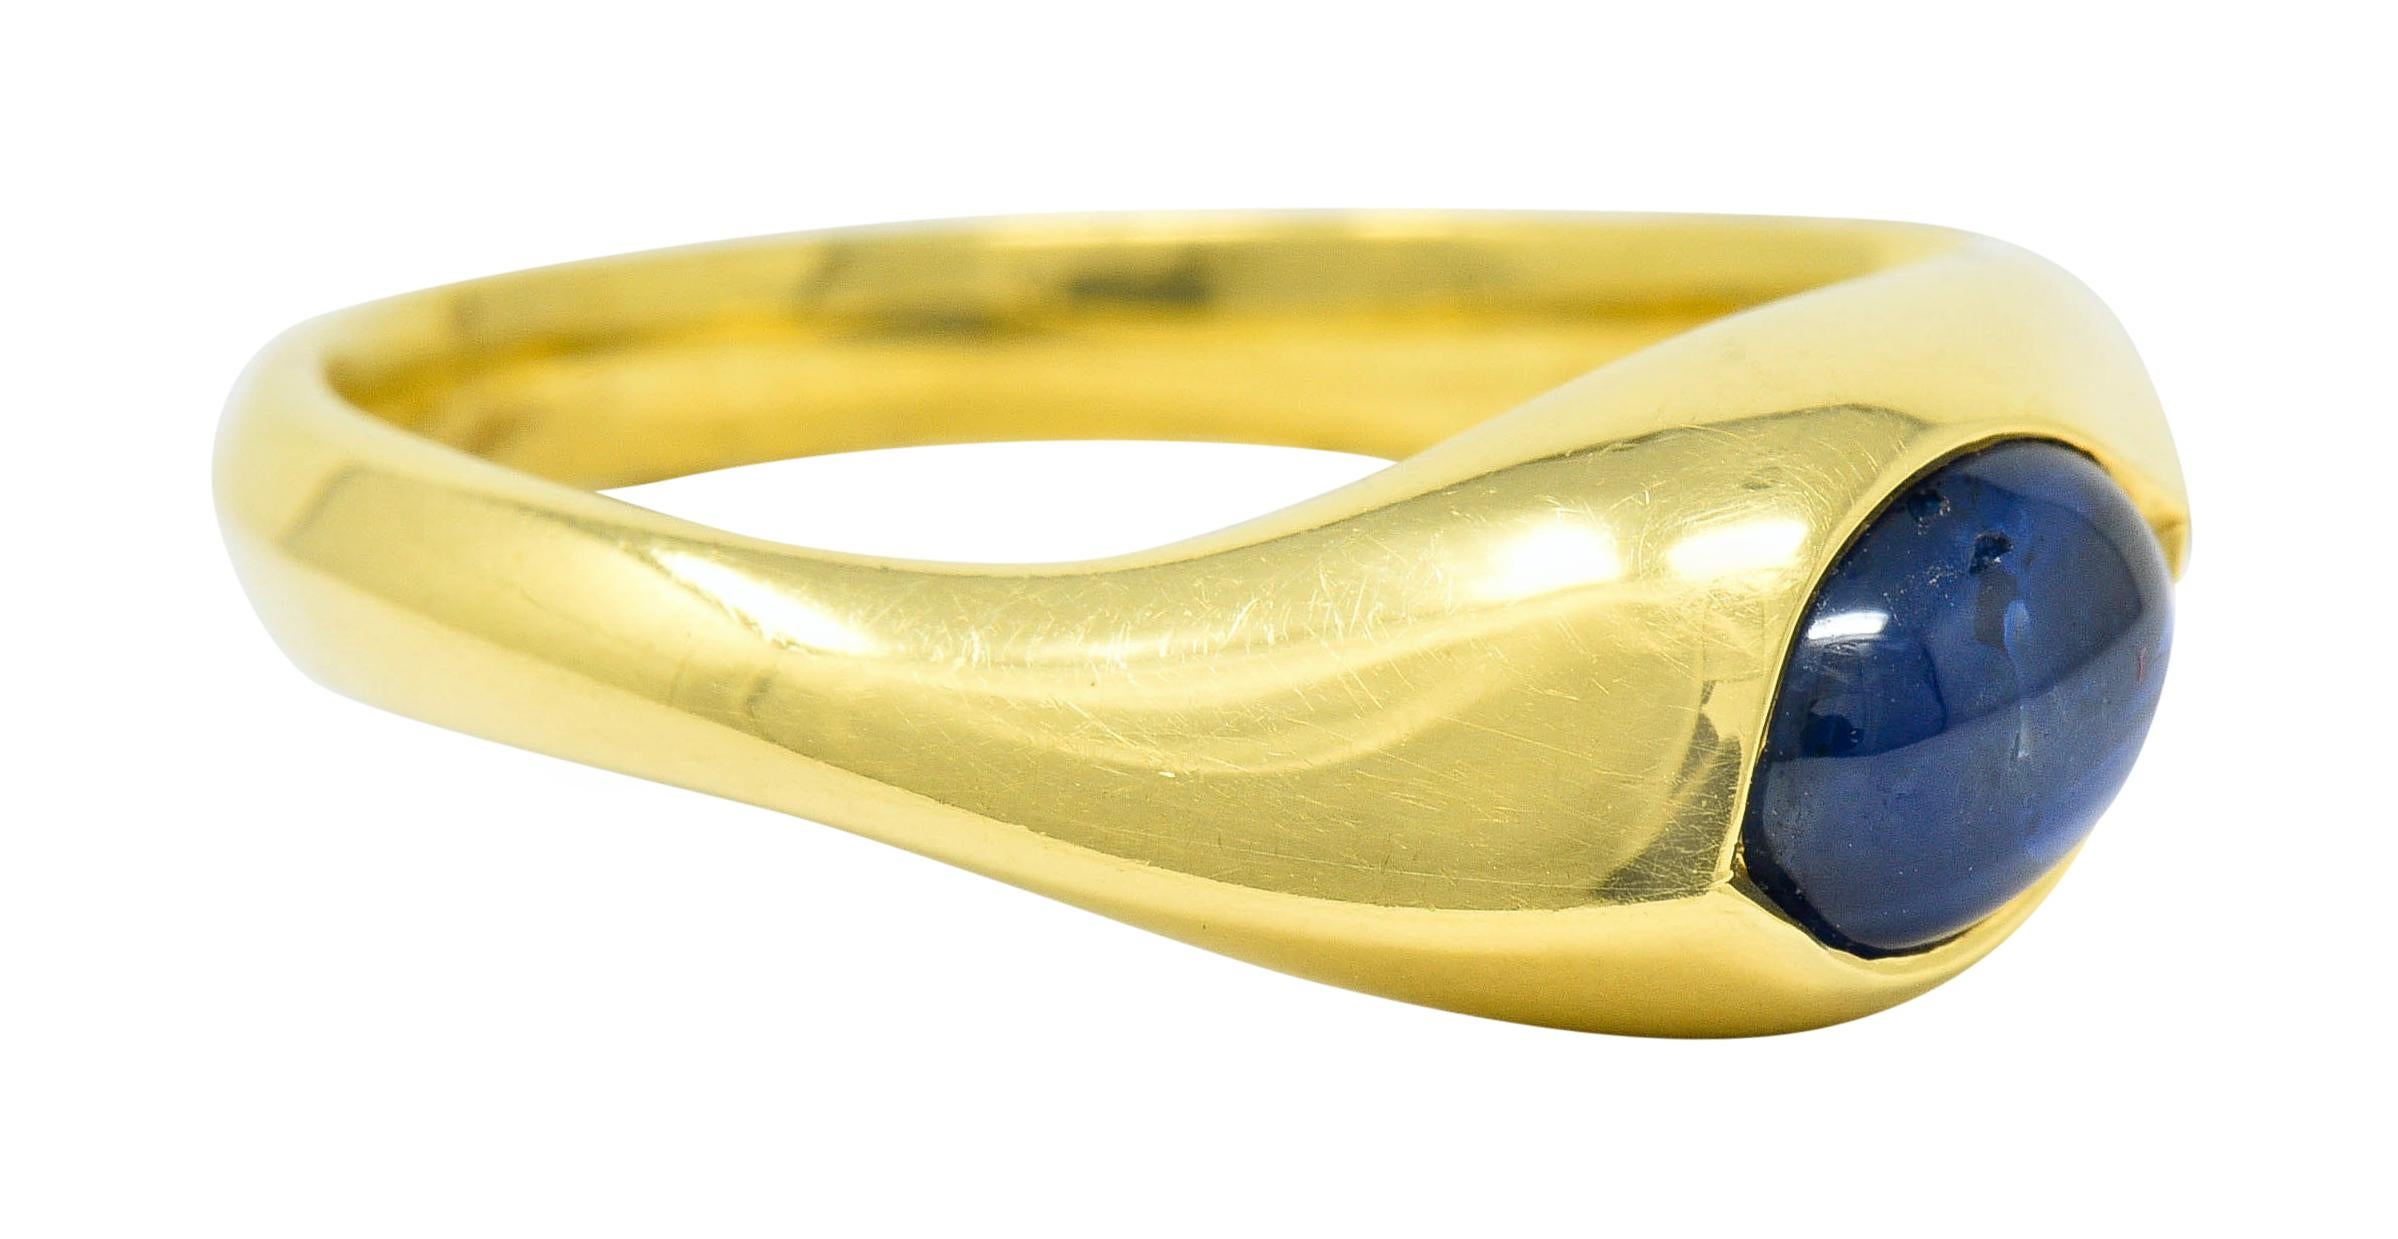 Band ring with a slight torqued design and knife edged shank

Centers a flush set oval sapphire cabochon weighing approximately 0.80 carat

Bright royal blue in color and translucent with natural inclusions

Inscribed with maker's mark and 18K for